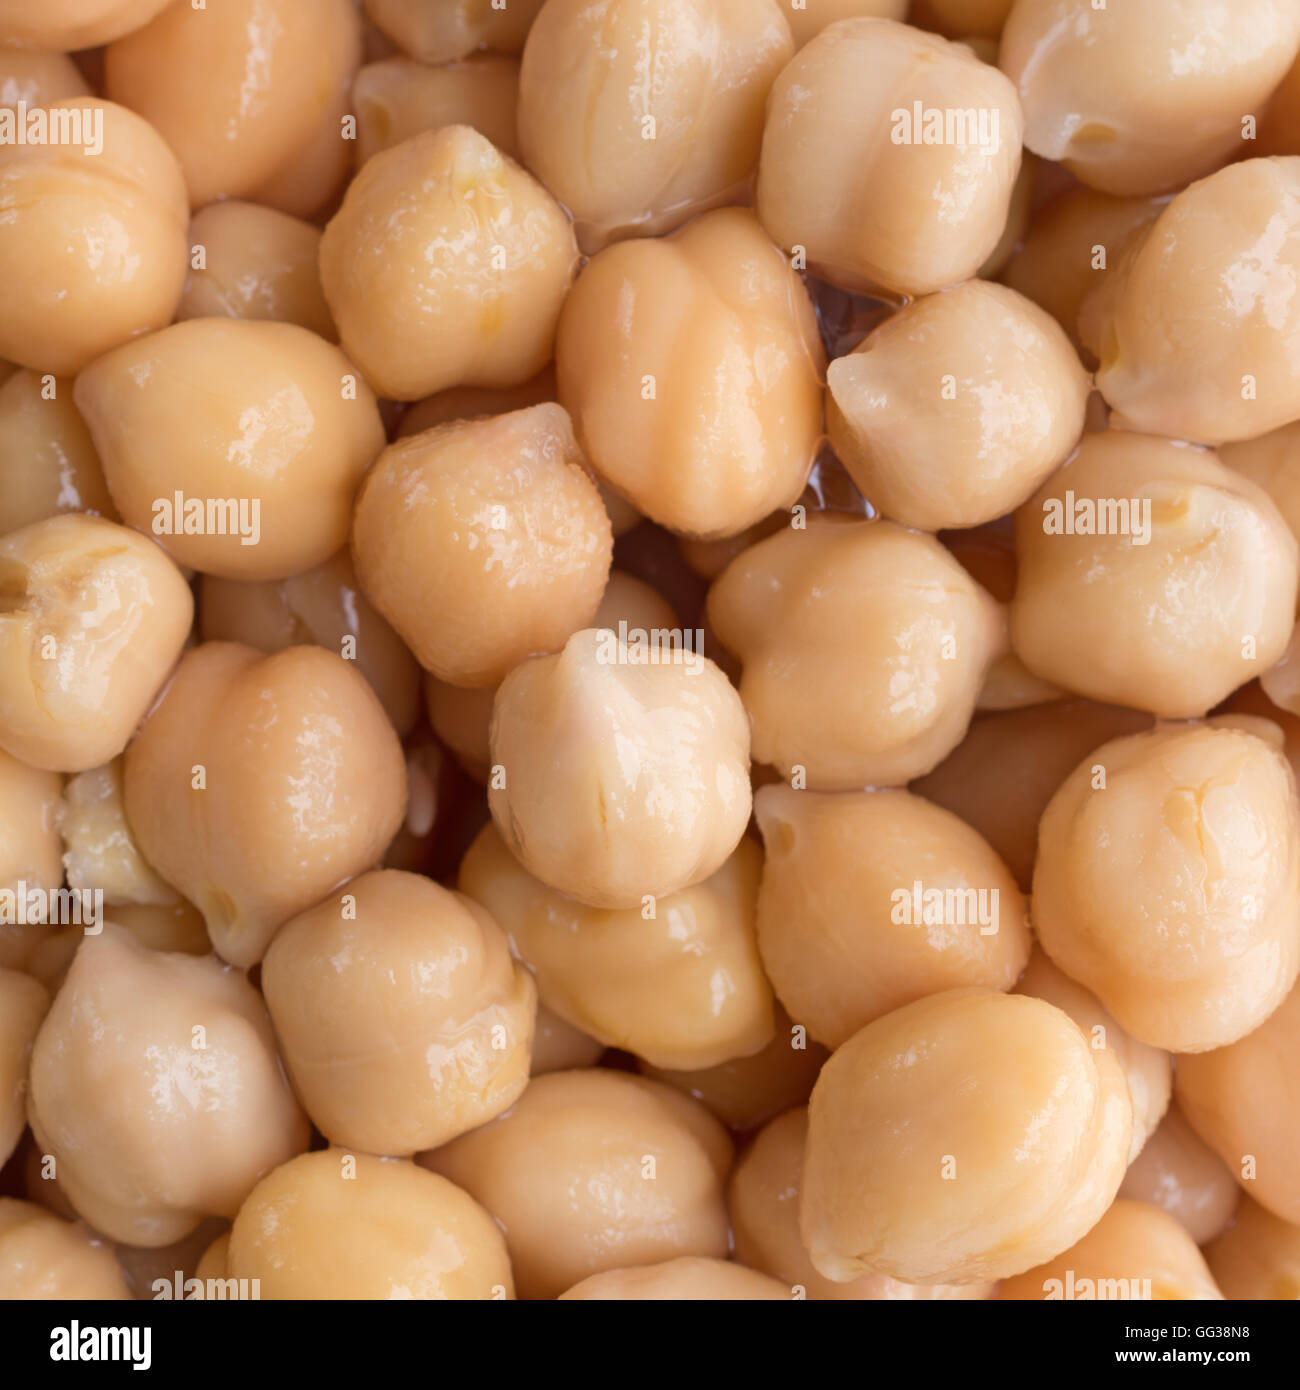 A very close view of organic garbanzo beans. Stock Photo